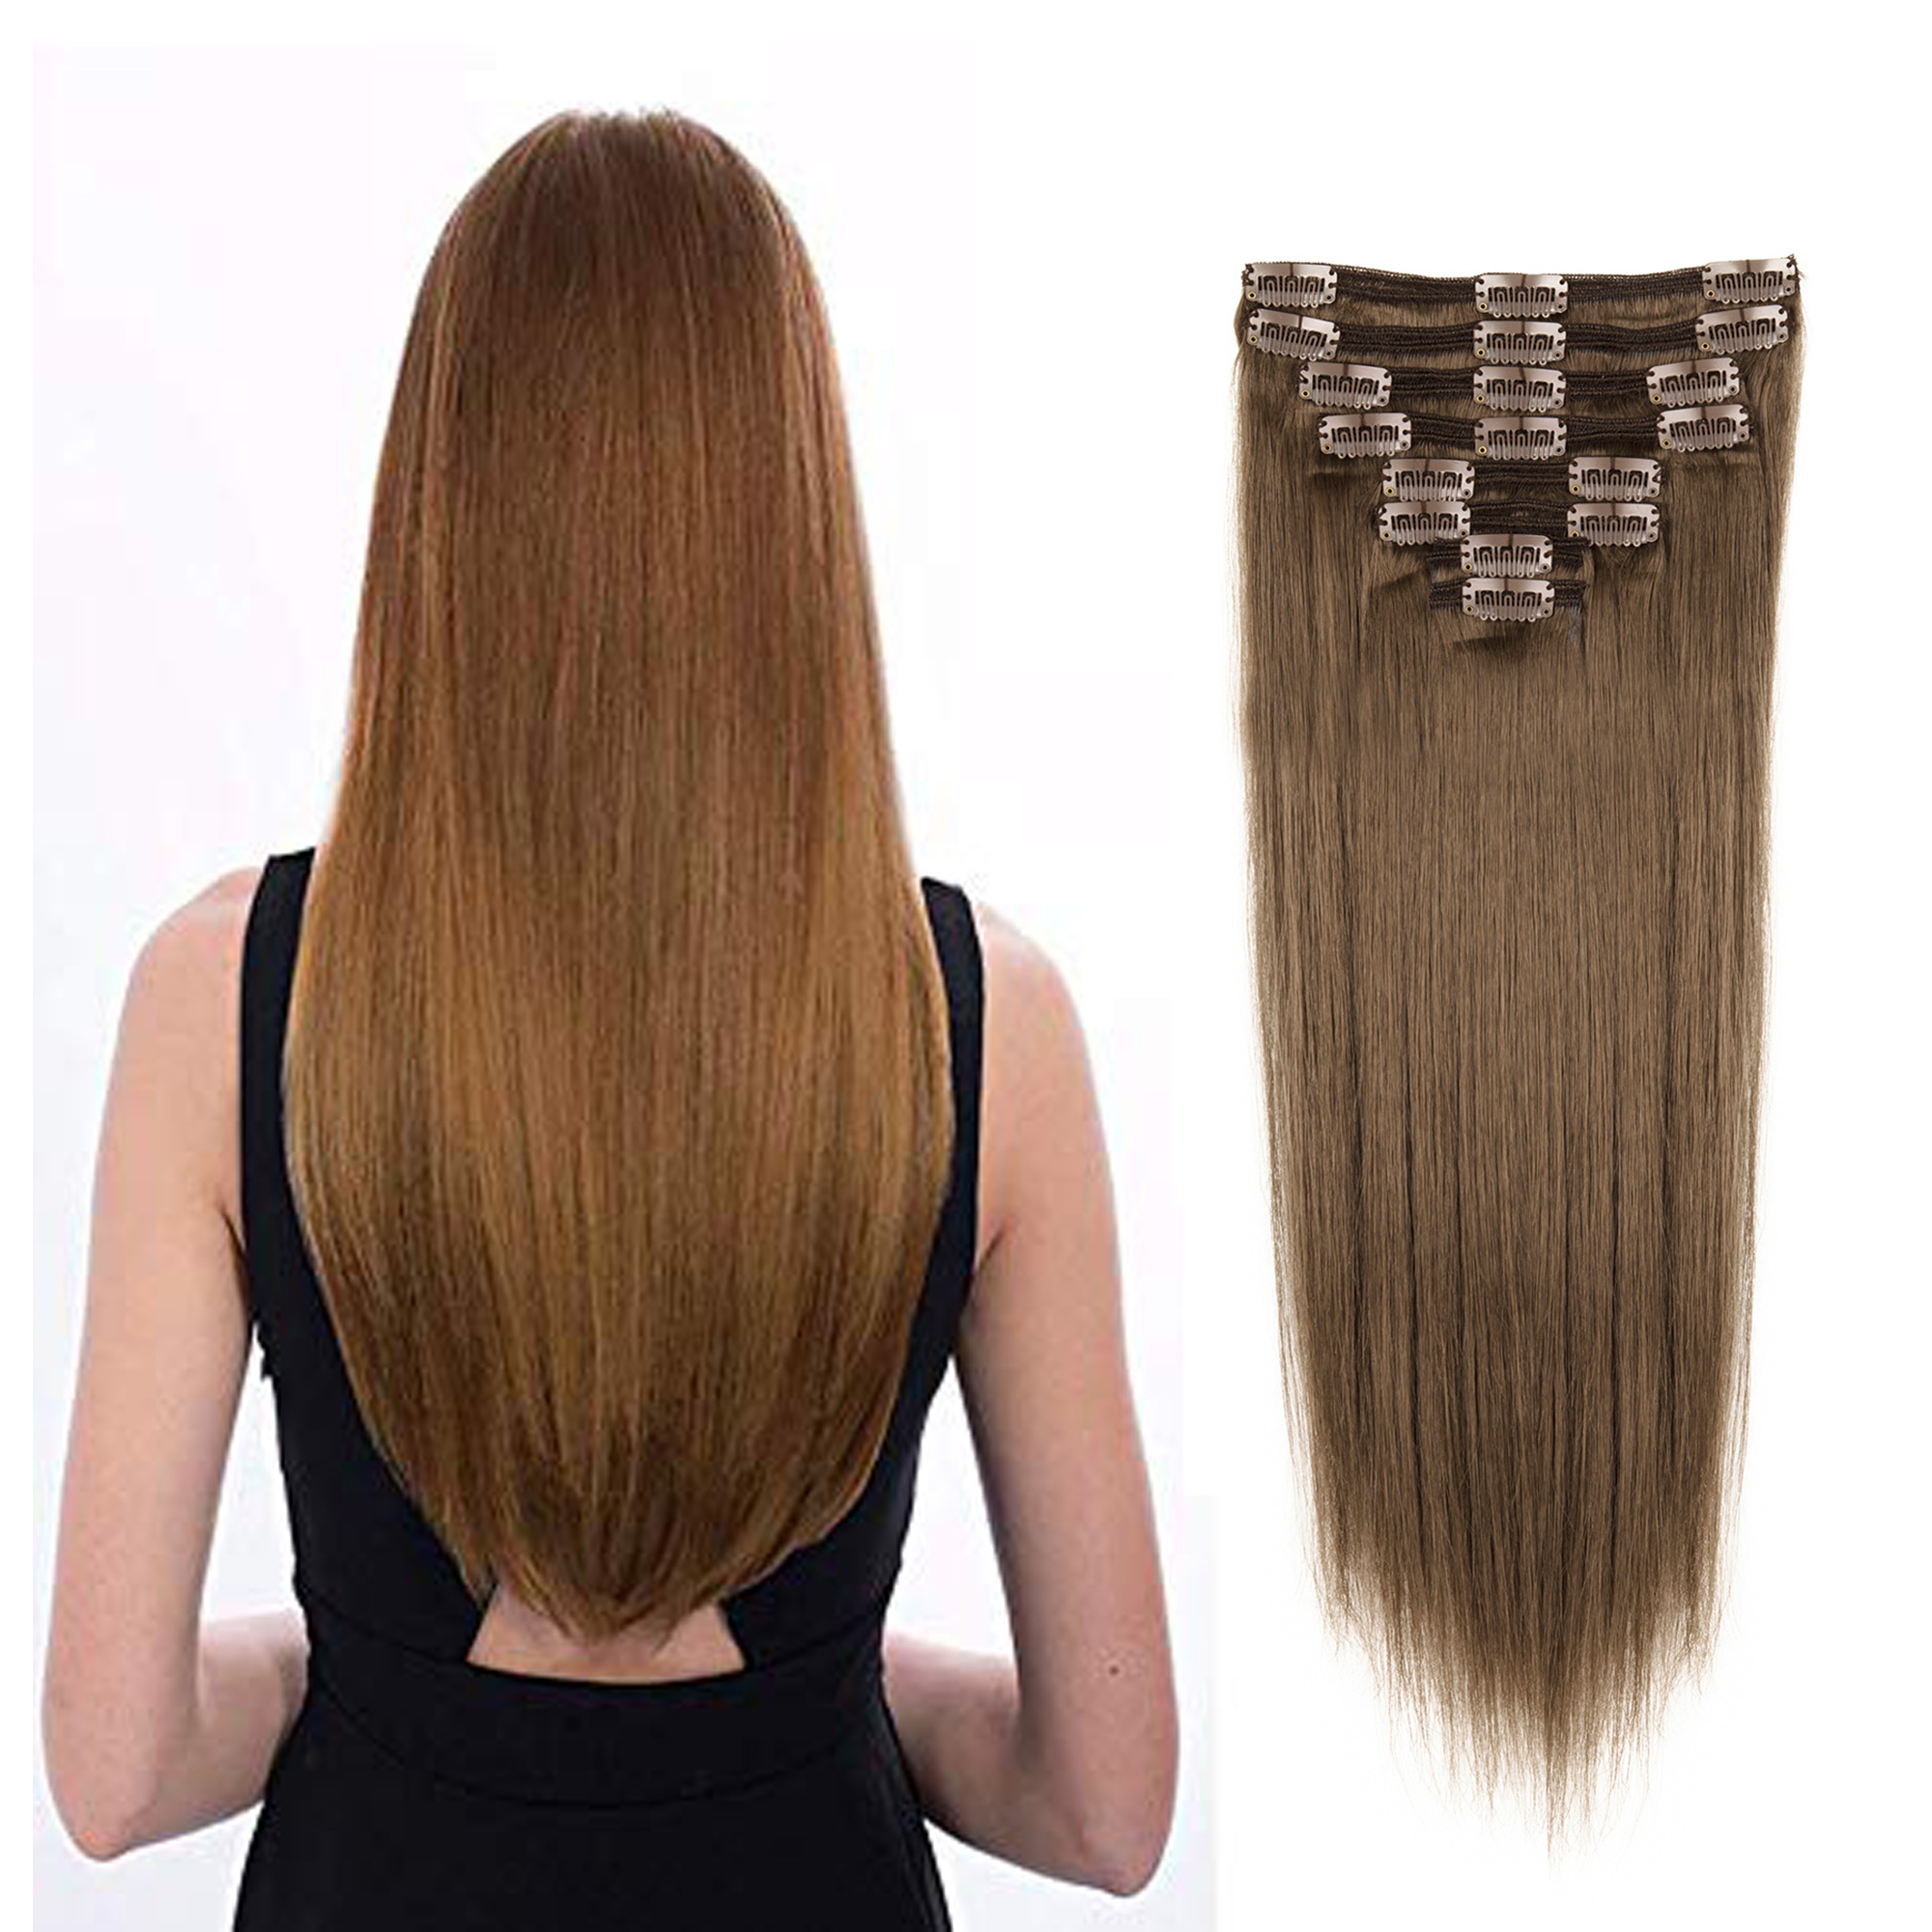 LELINTA 8pcs 14" 16" 18" 20" 22" Clip in Hair Extensions Remy Human Hair Women Silky Straight Human Hair Extensions 18 Clips - image 1 of 8